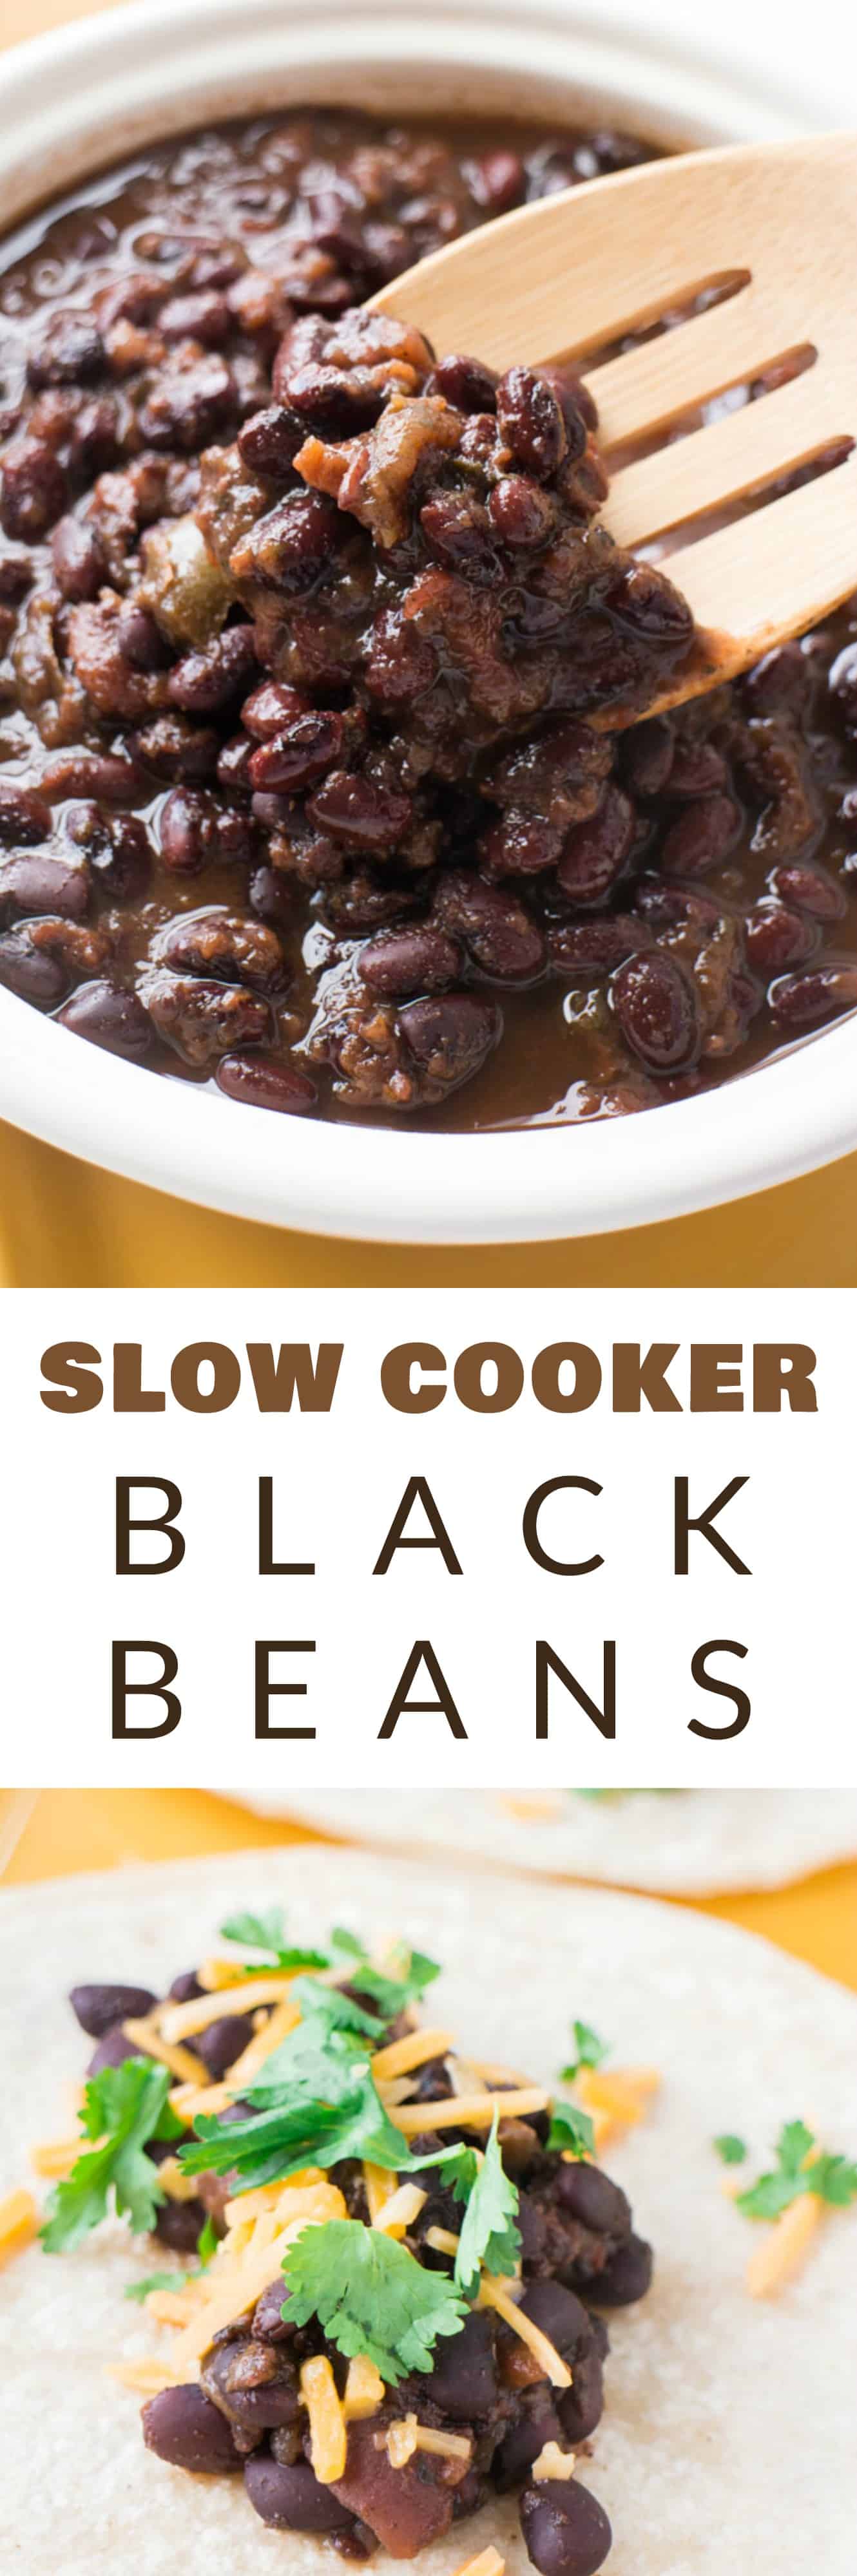 EASY SLOW COOKER black beans made with dried beans! This healthy, vegetarian recipe cooked in the crock pot for 4 hours is so easy and healthy! Because it uses dried beans it's cheap to make too! We love serving these beans on flour tortillas for black bean tacos! It's one of my families favorite comfort foods! 